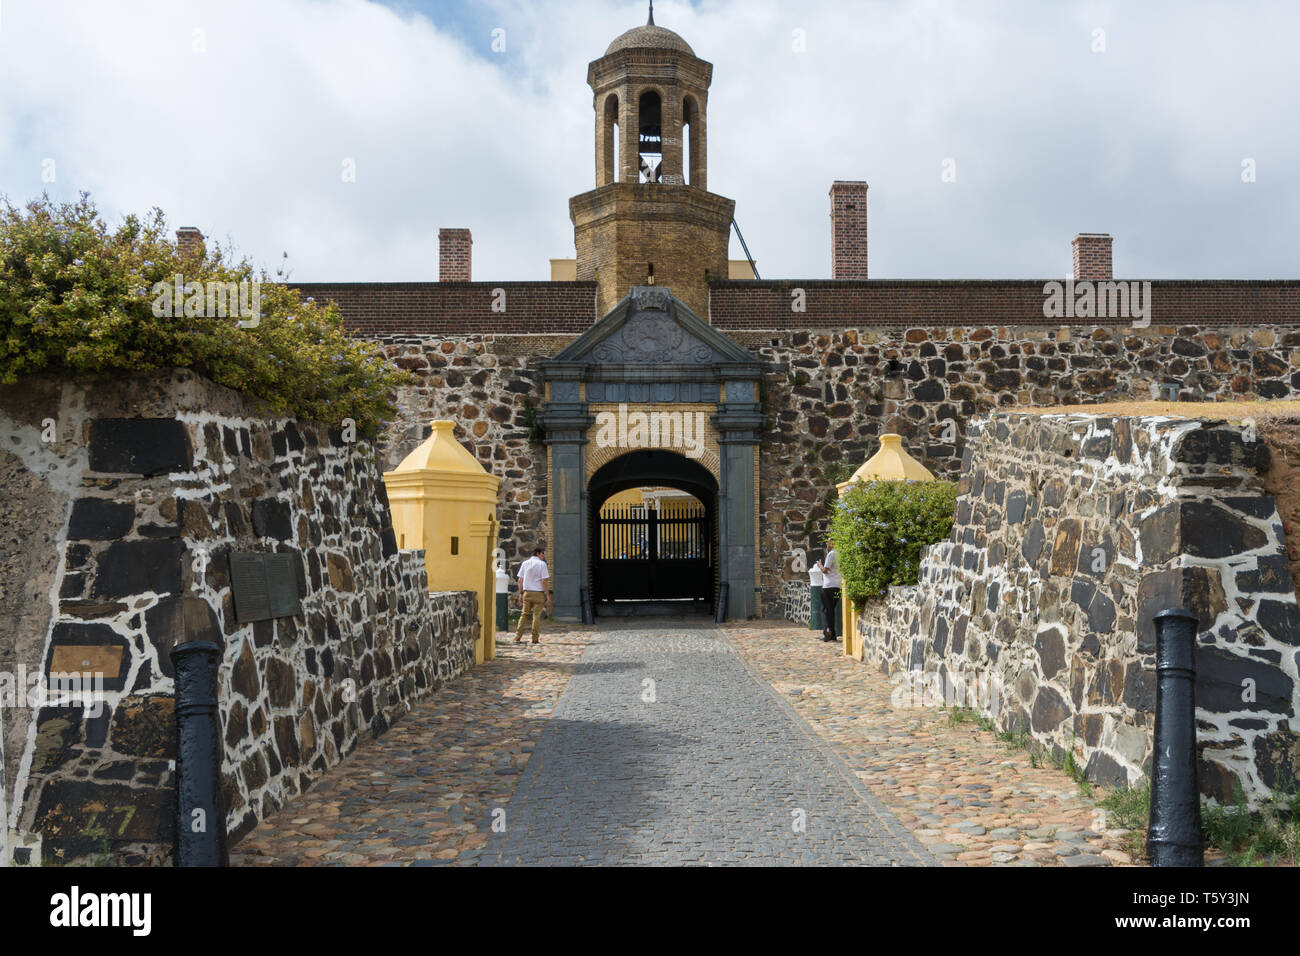 Entrance, Castle of Good Hope, Cape Town, South Africa. Stock Photo